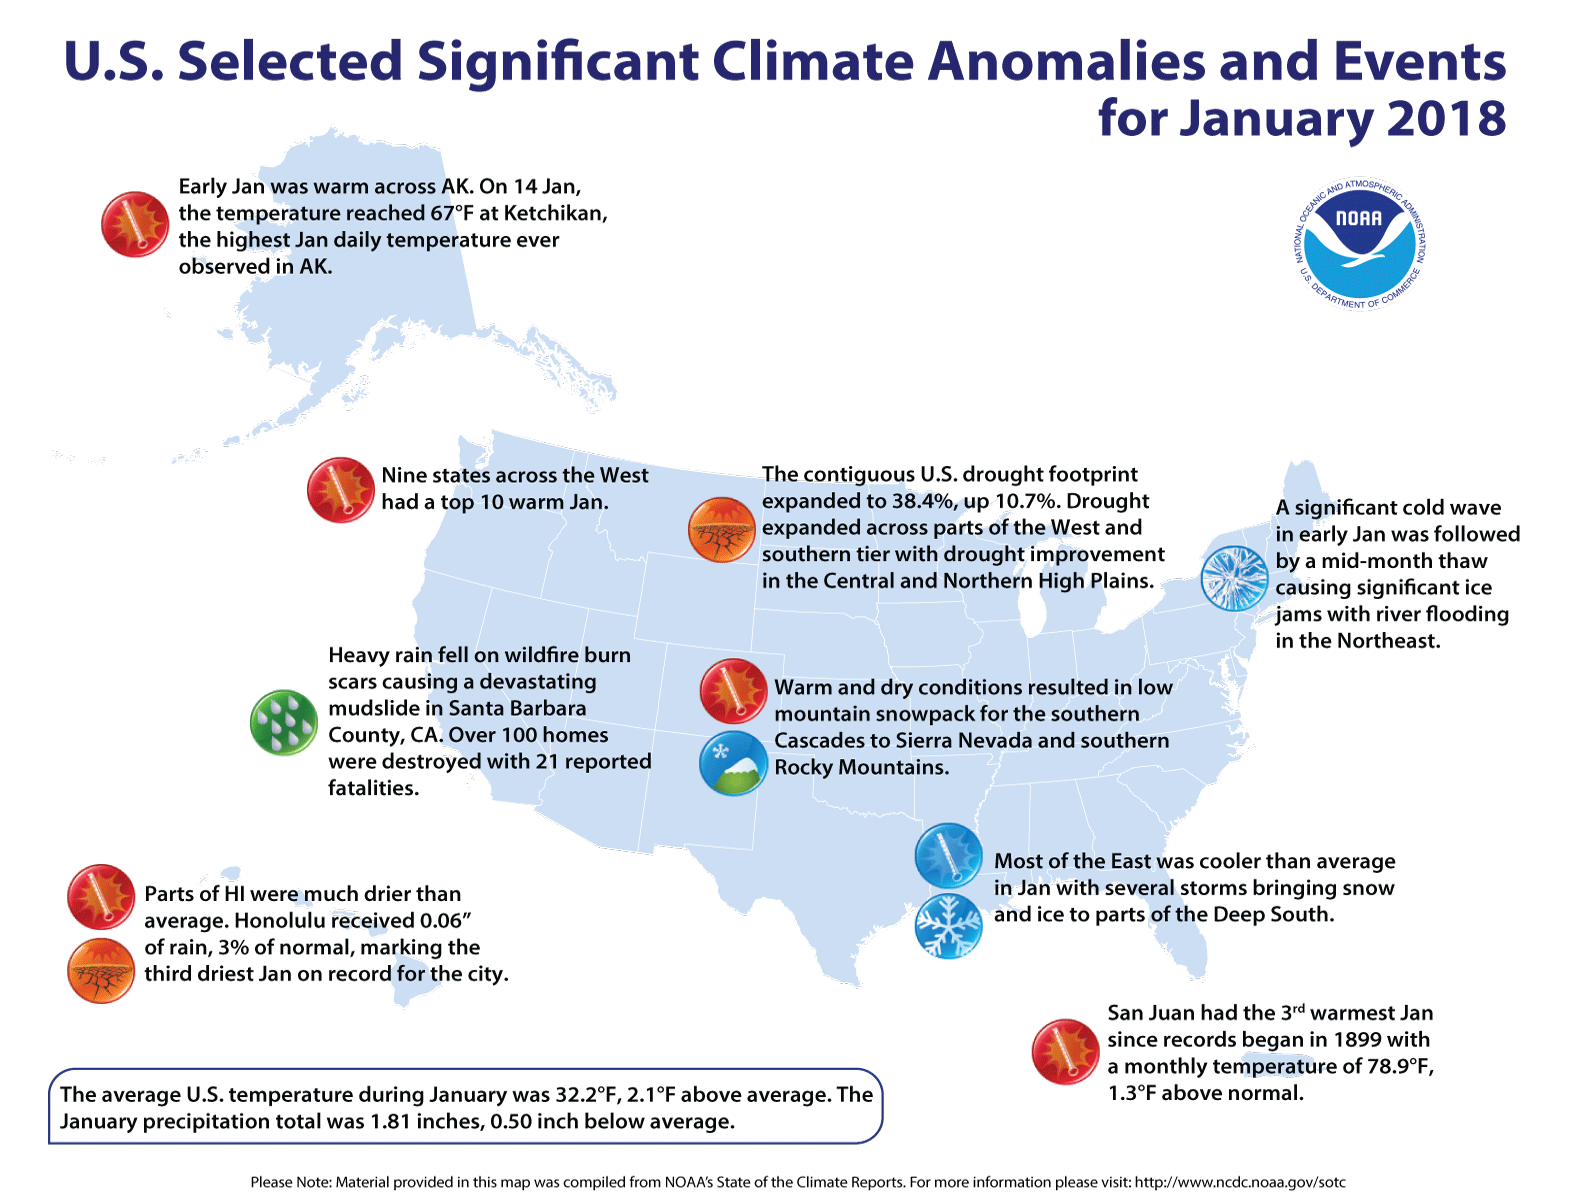 An annotated map of the United States showing other climate events that occurred in January 2018. For details, see bulleted list below in our story and also visit http://www.ncdc.noaa.gov/sotc/summary-info/national/201801.